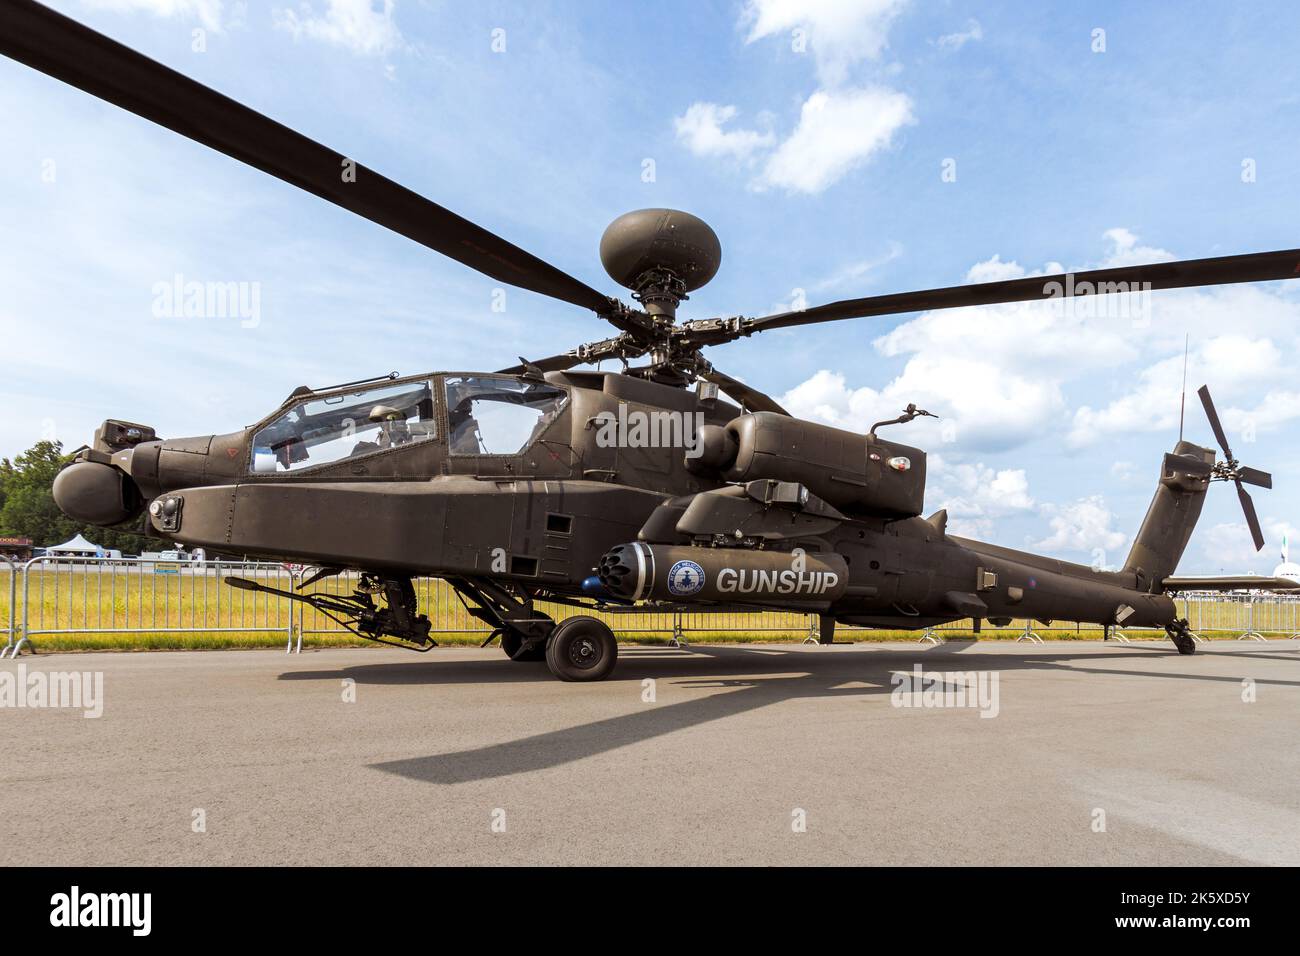 British Army AH-64D attack helicopter on display at the Berlin Air Show. Germany - June 2, 2016 Stock Photo